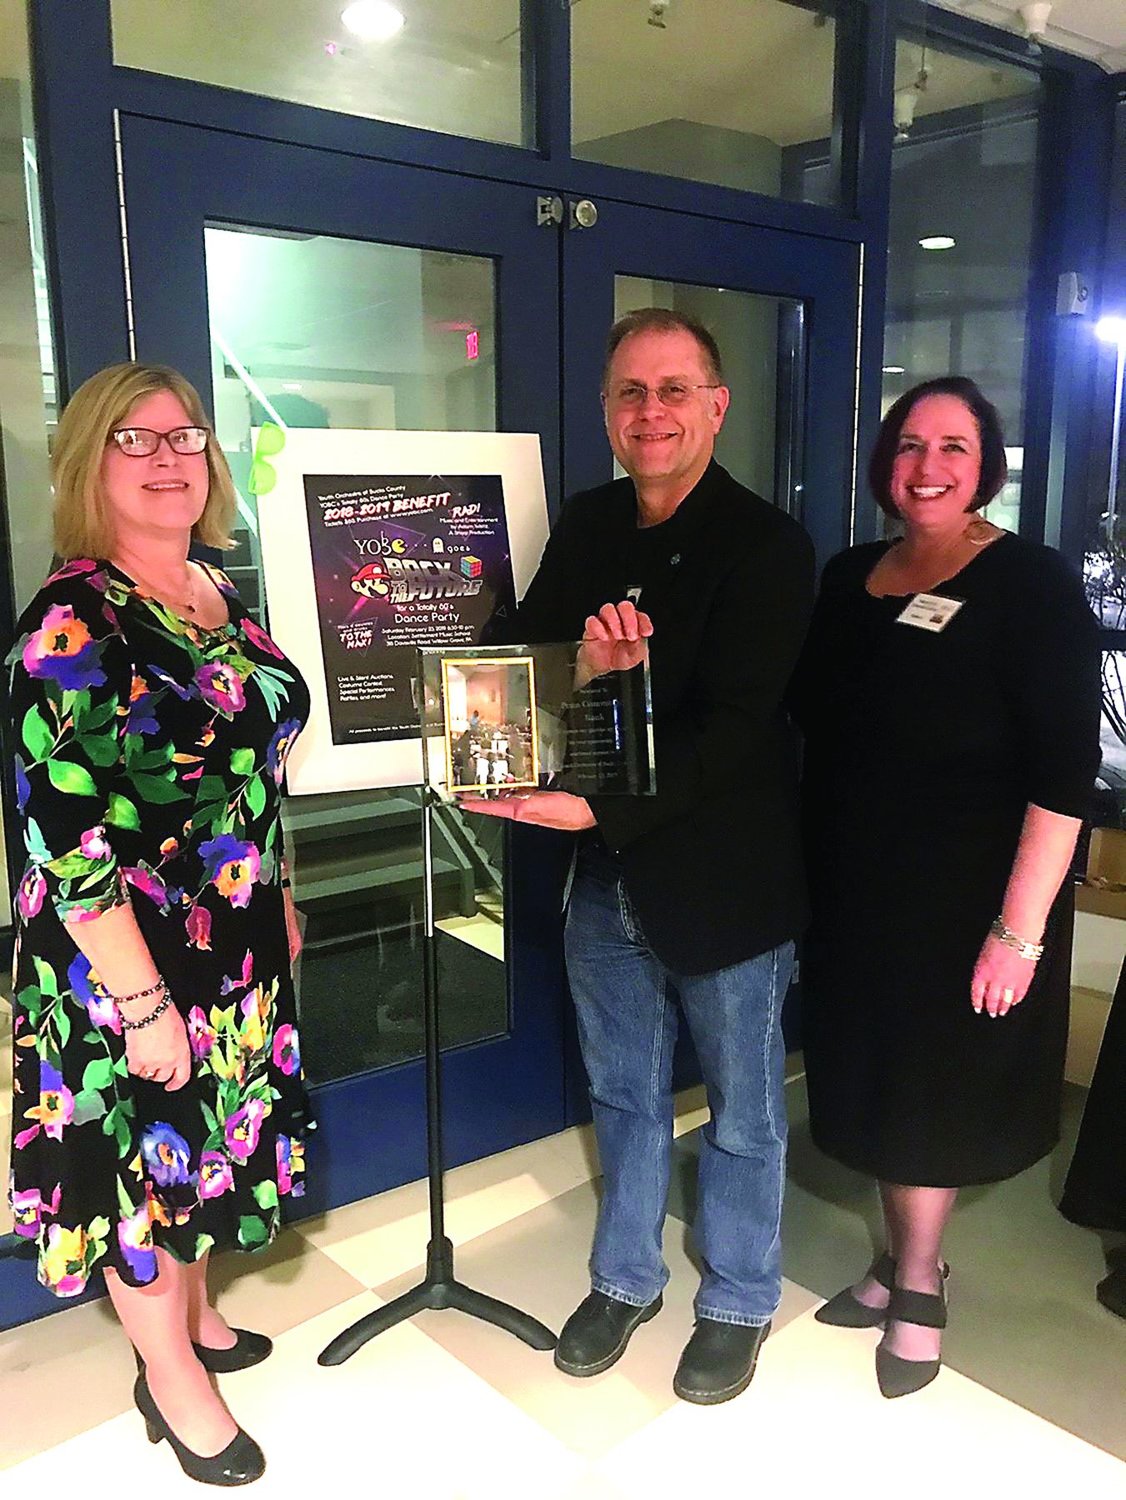 Penn Community bank executives, Diane Brown, chief administrative officer; Todd Hurley, chief relationship officer; and Stephanie Schwartzberg, general counsel, accept the award from the Youth Orchestra of Bucks County during its annual benefit.